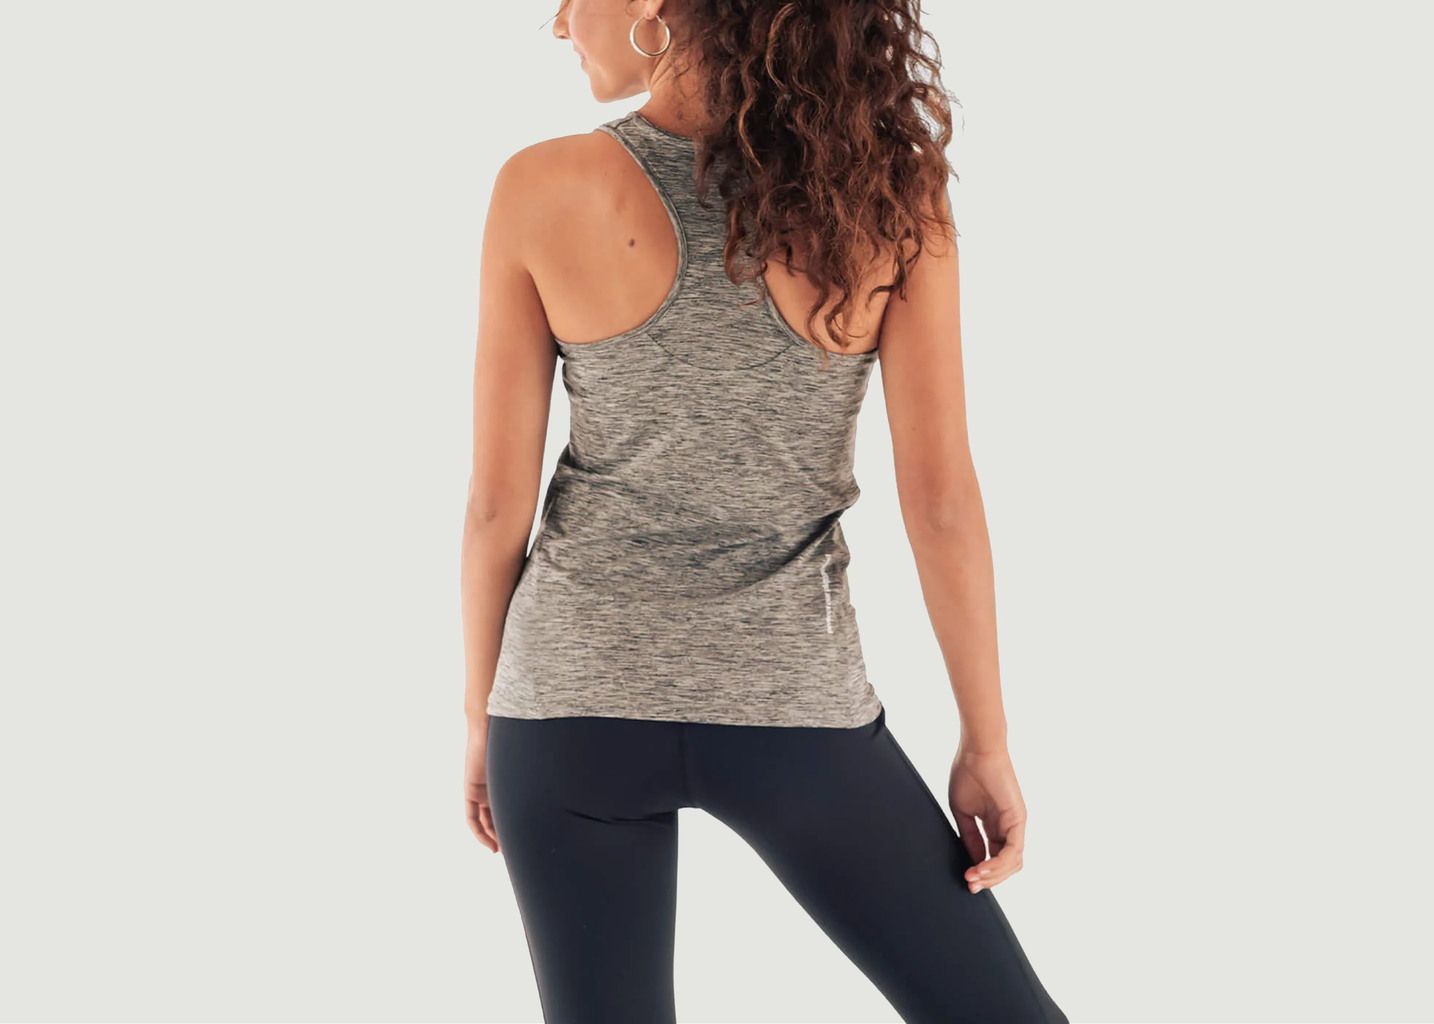 Free Your Mind Quick Dry tank top - Circle Sportswear